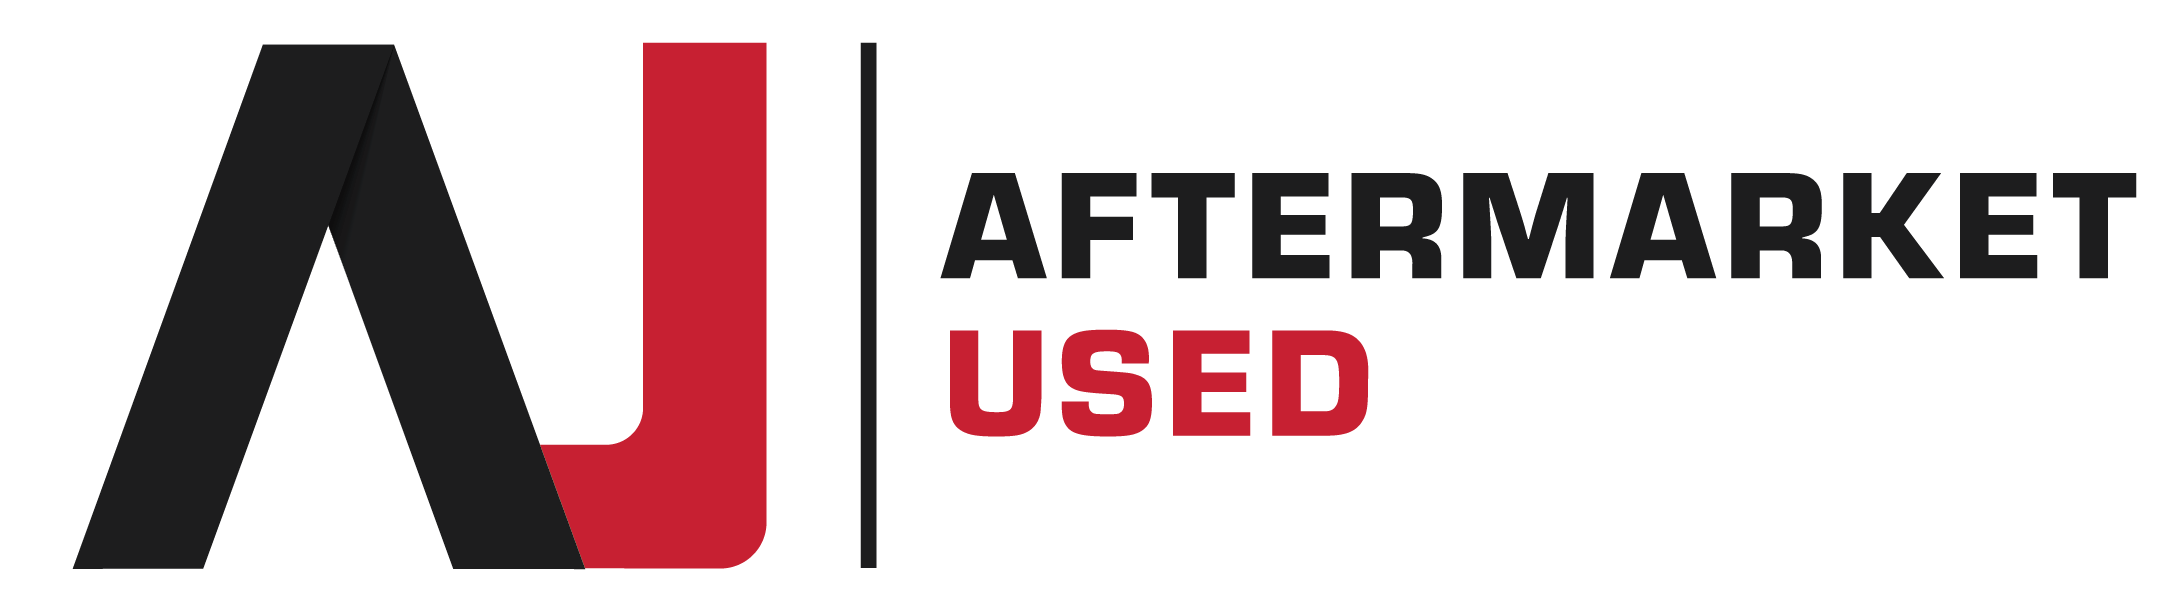 aftermarket-used-logo-colour